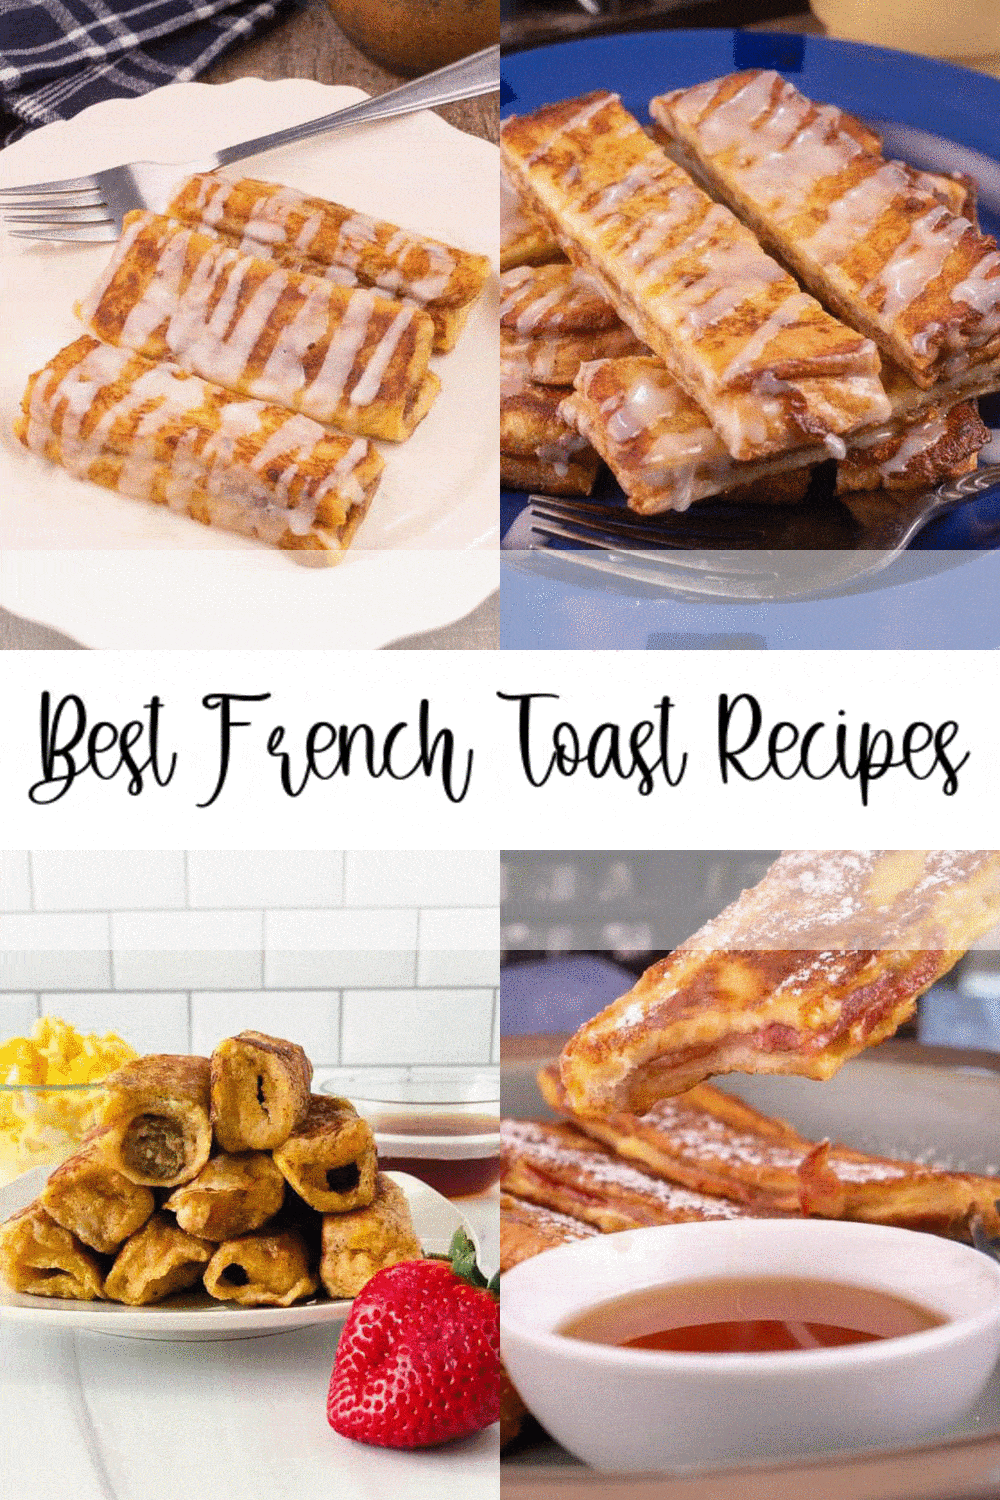 9 French Toast Recipes - Best French Toast Ideas